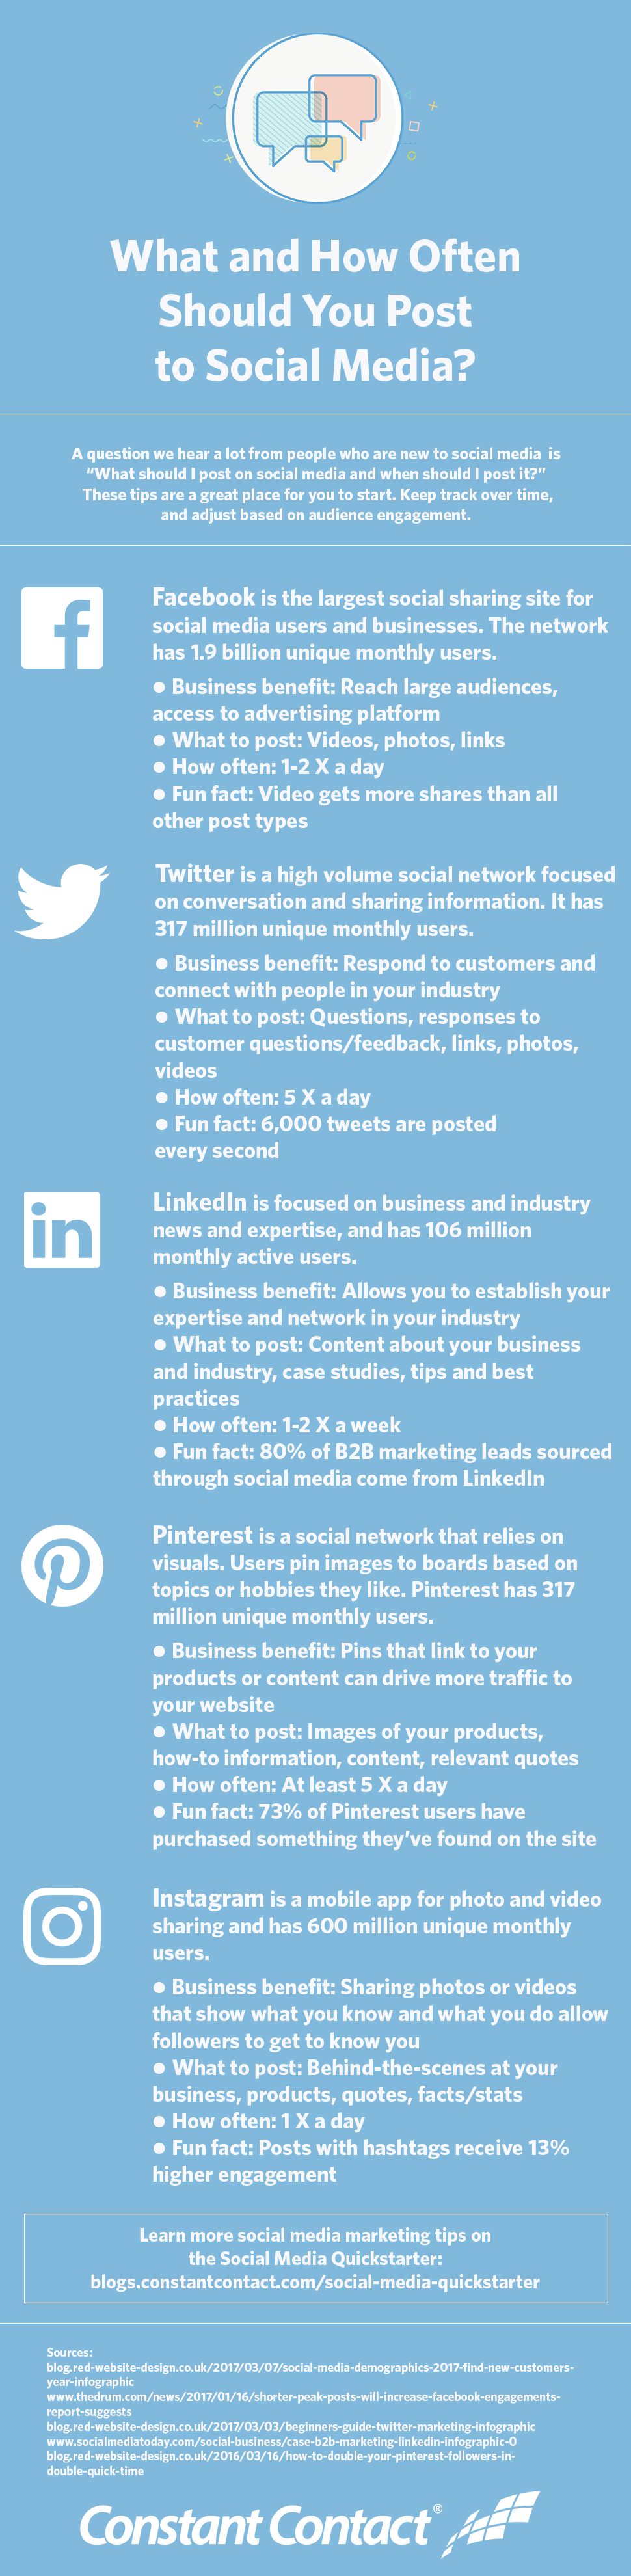 What And How Often To Post On Social Media? - #infographic